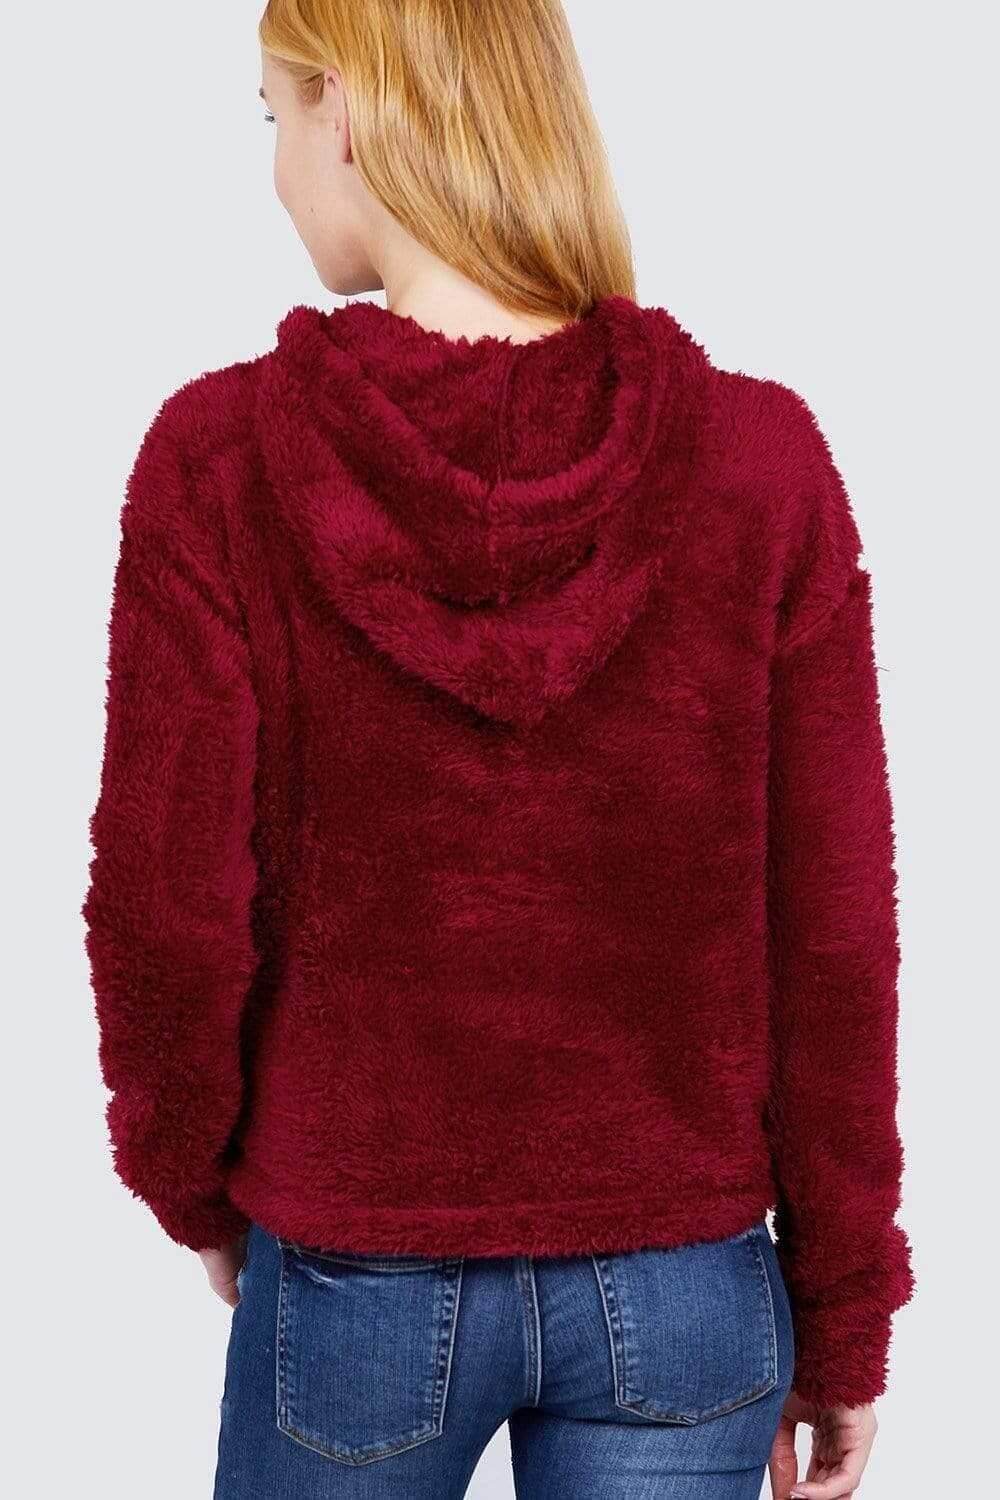 Burgundy Long Sleeve Faux Fur Sweater - Shopping Therapy L Sweater